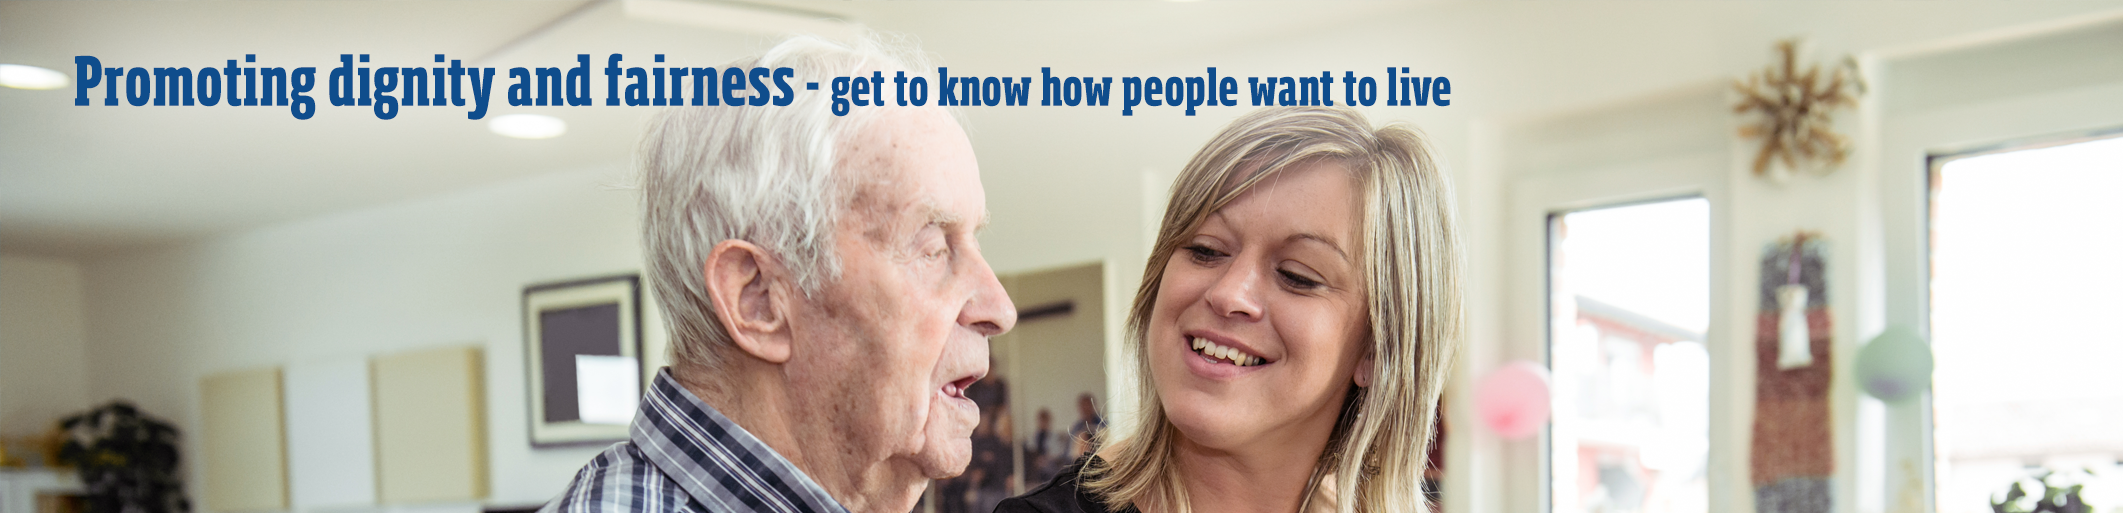 Promoting Dignity and fairness - get to know how people want to live